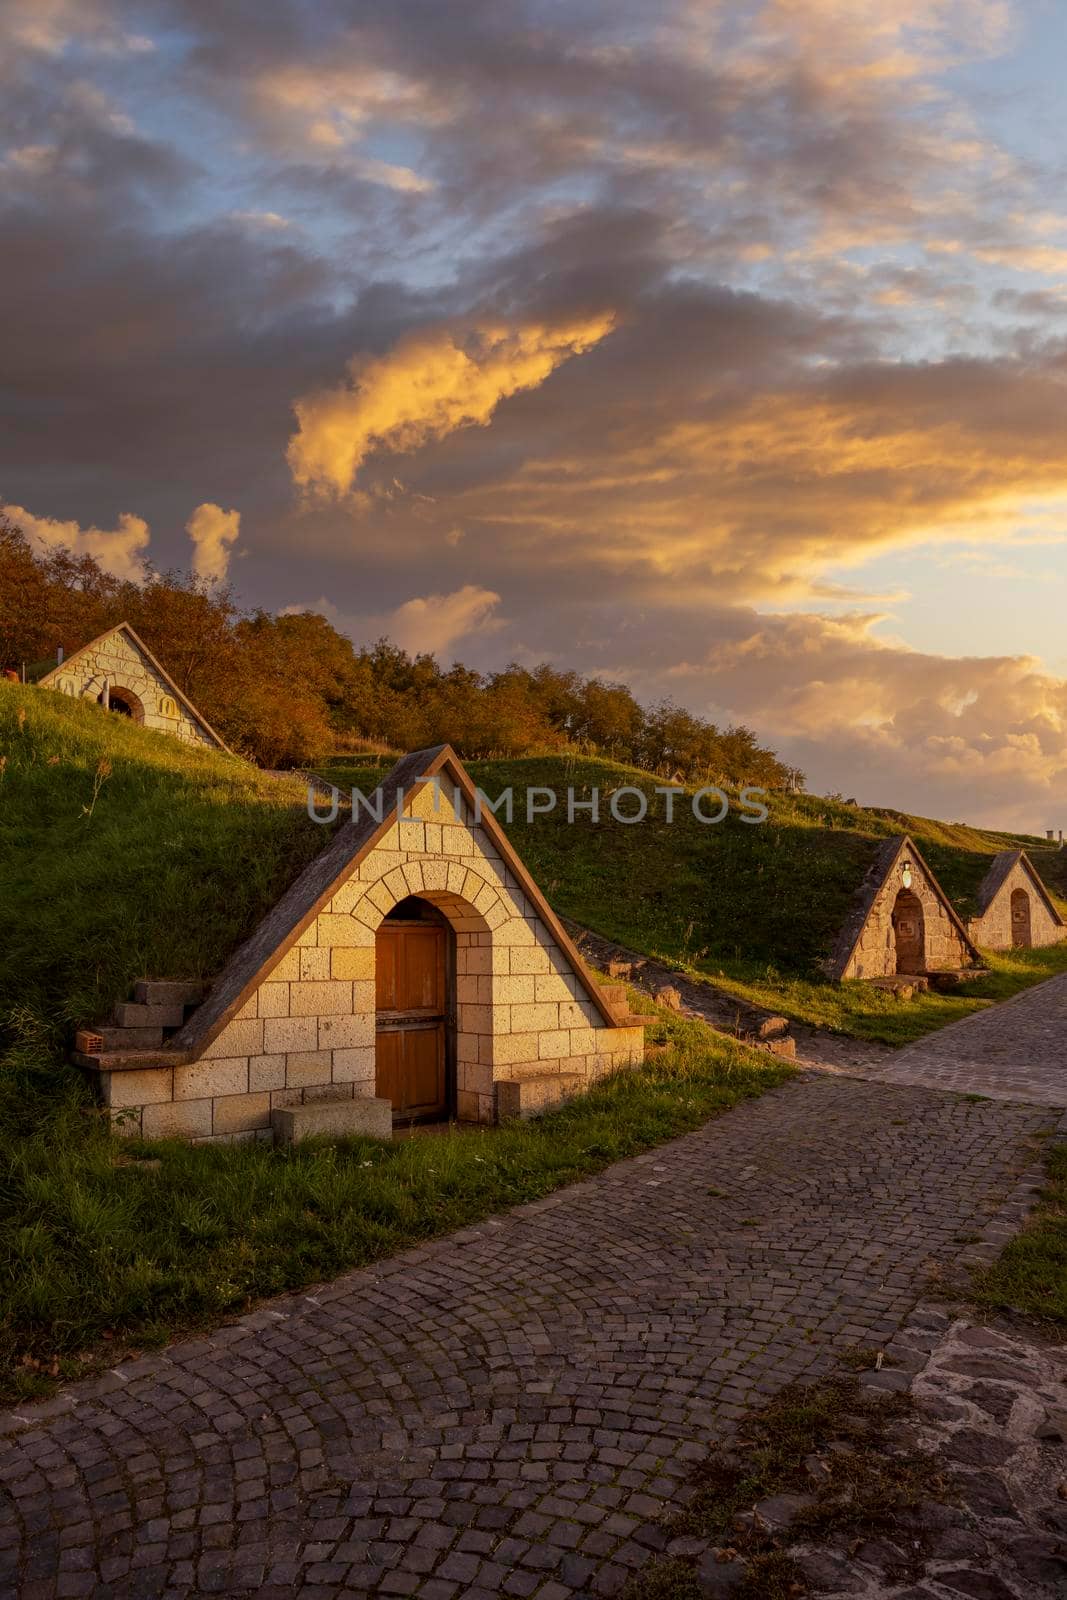 Autumnal Gombos-hegyi pincesor in Hercegkut, UNESCO site, Great Plain, North Hungary by phbcz